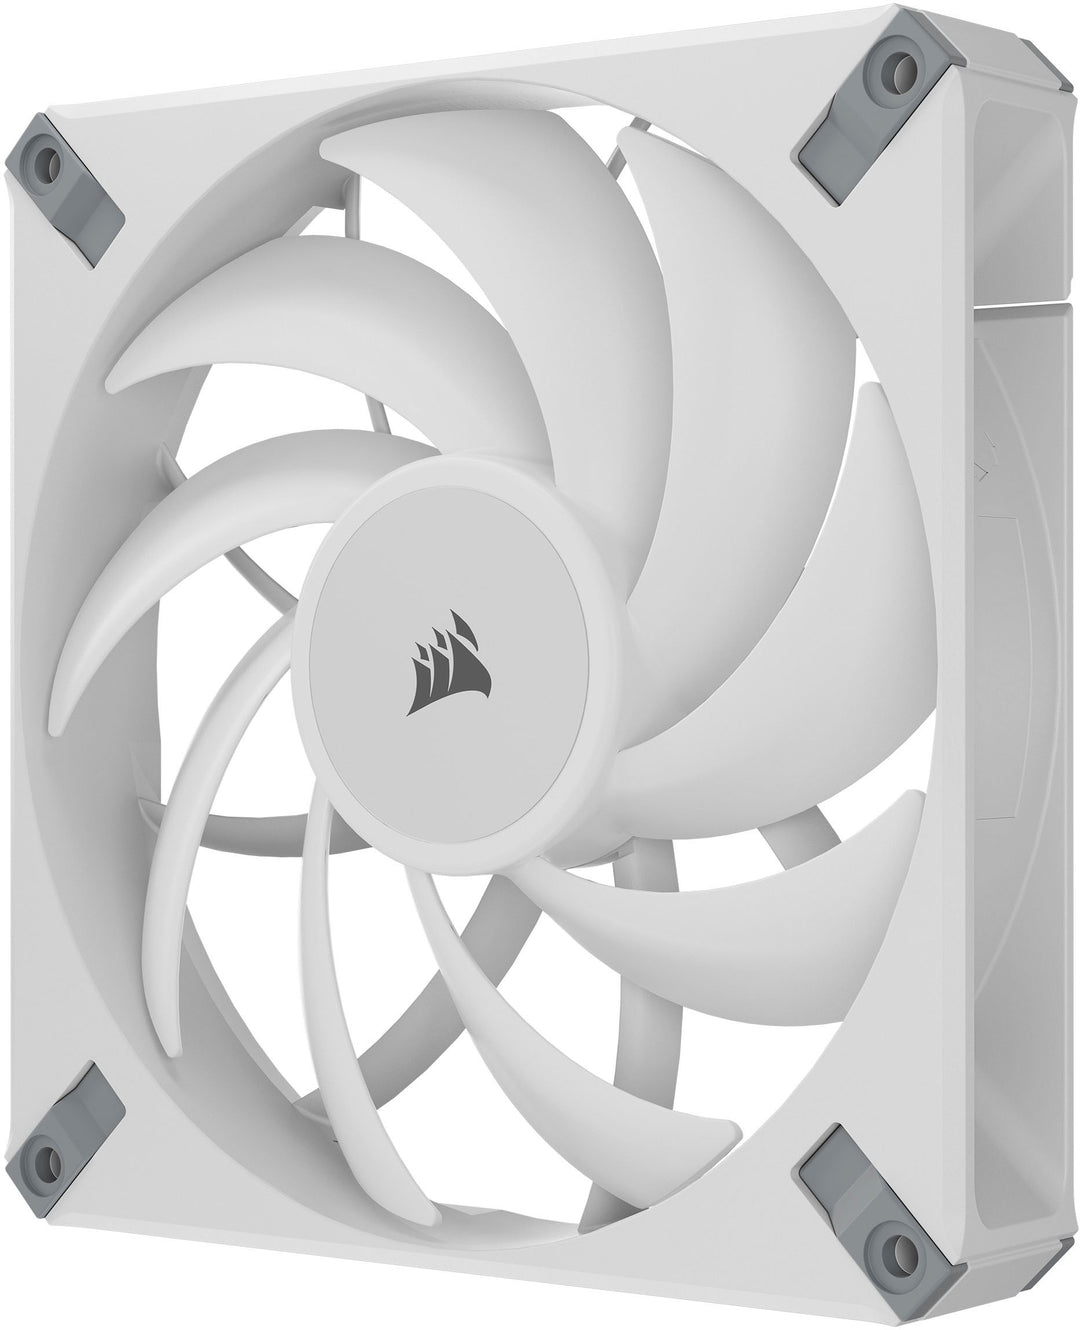 CORSAIR - AF140 RGB ELITE 140mm Fluid Dynamic Bearing Dual Fan Kit with AirGuide Technology - White_6